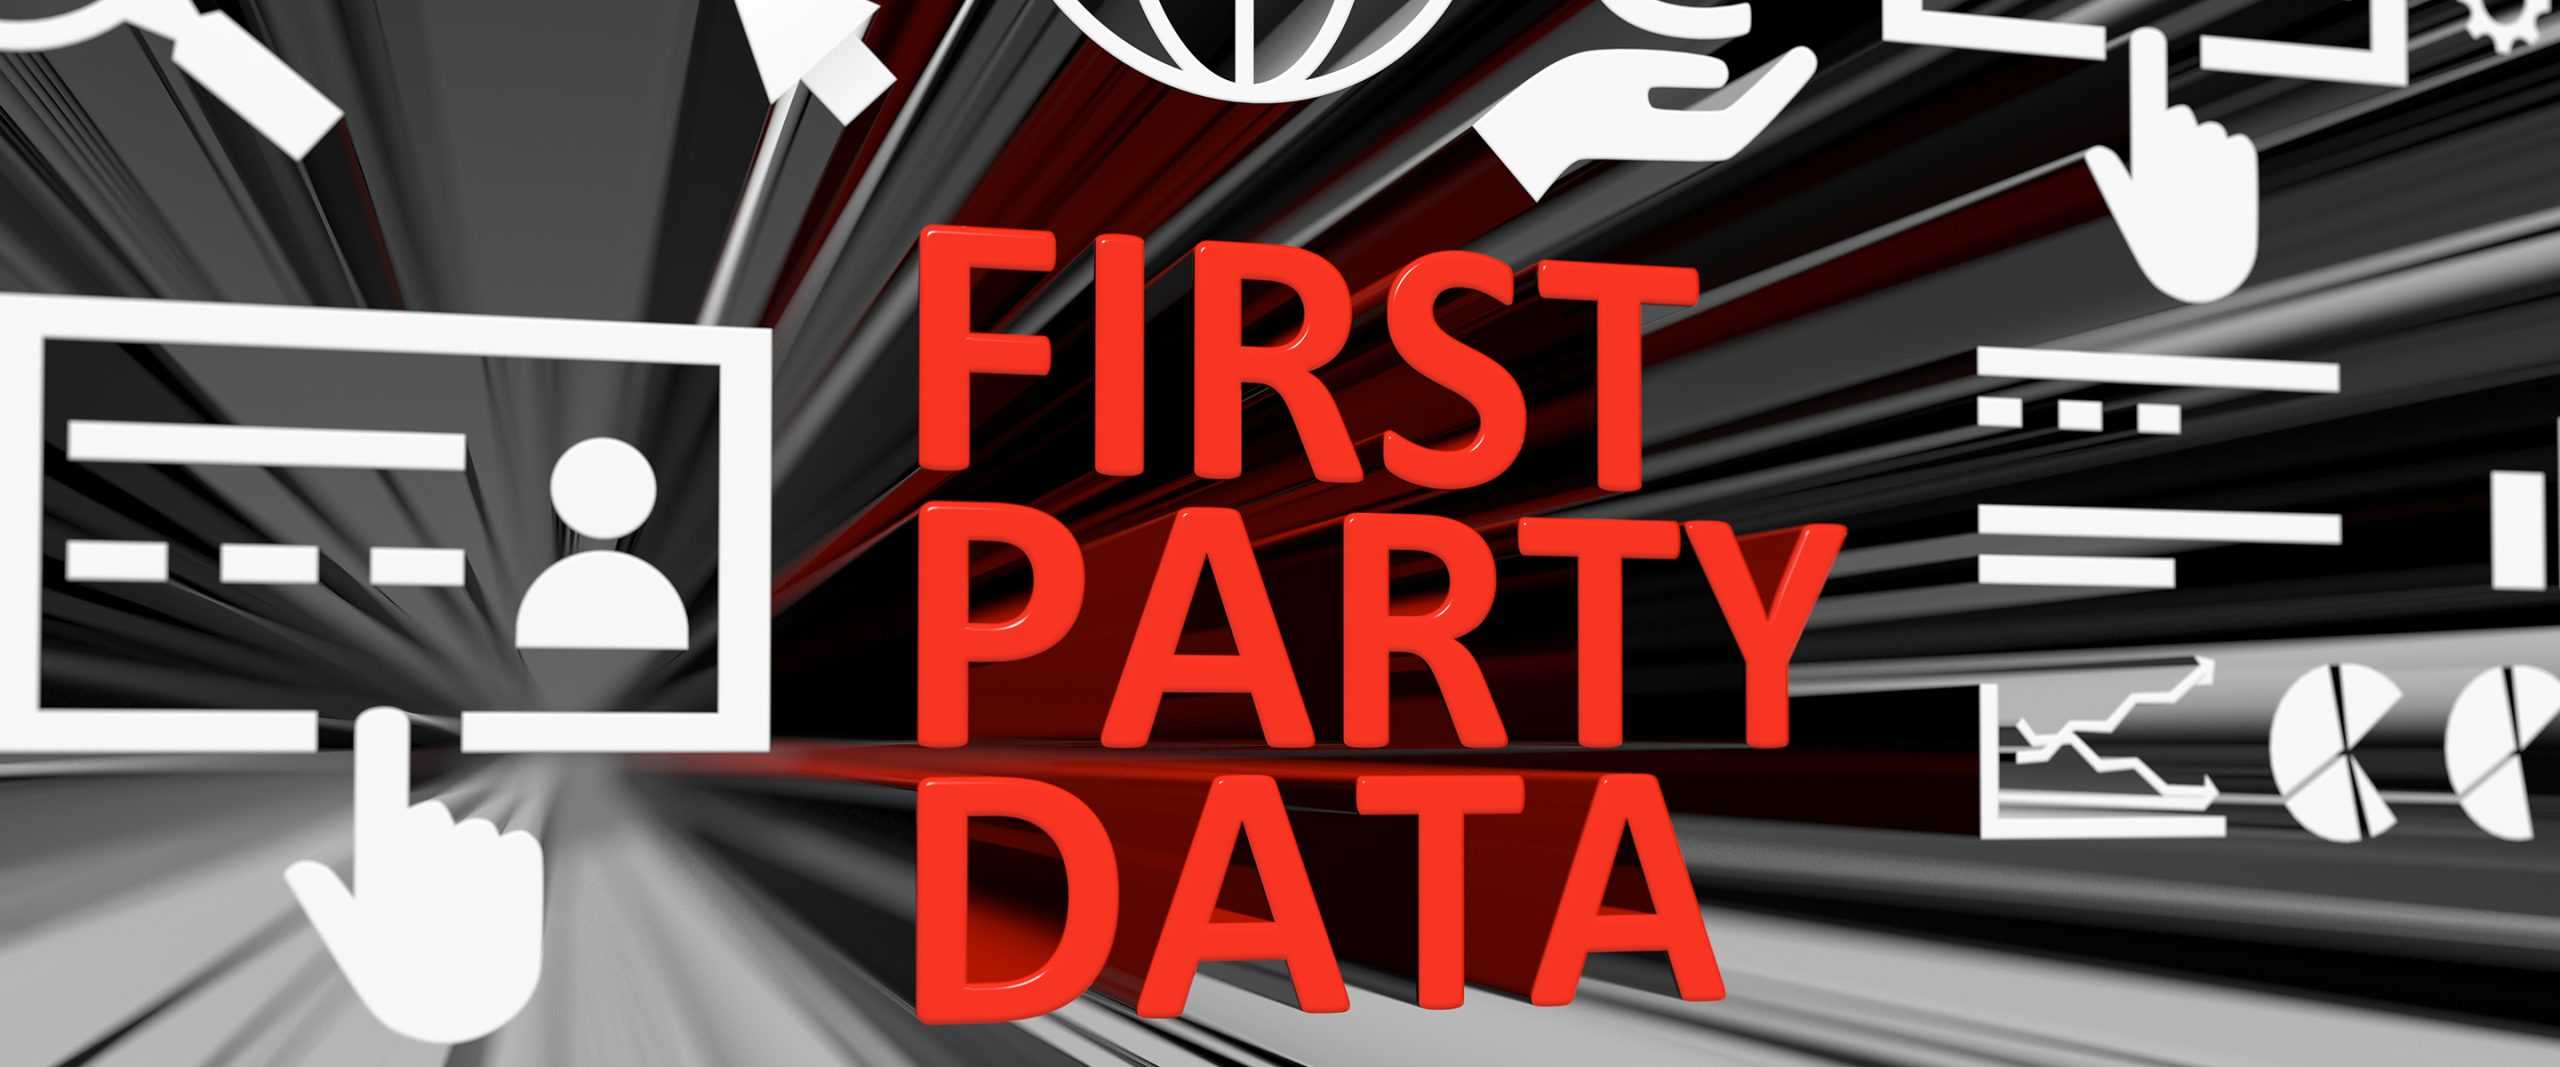 First party data is growing in importance as we move towards increasing privacy and consumer controls globally